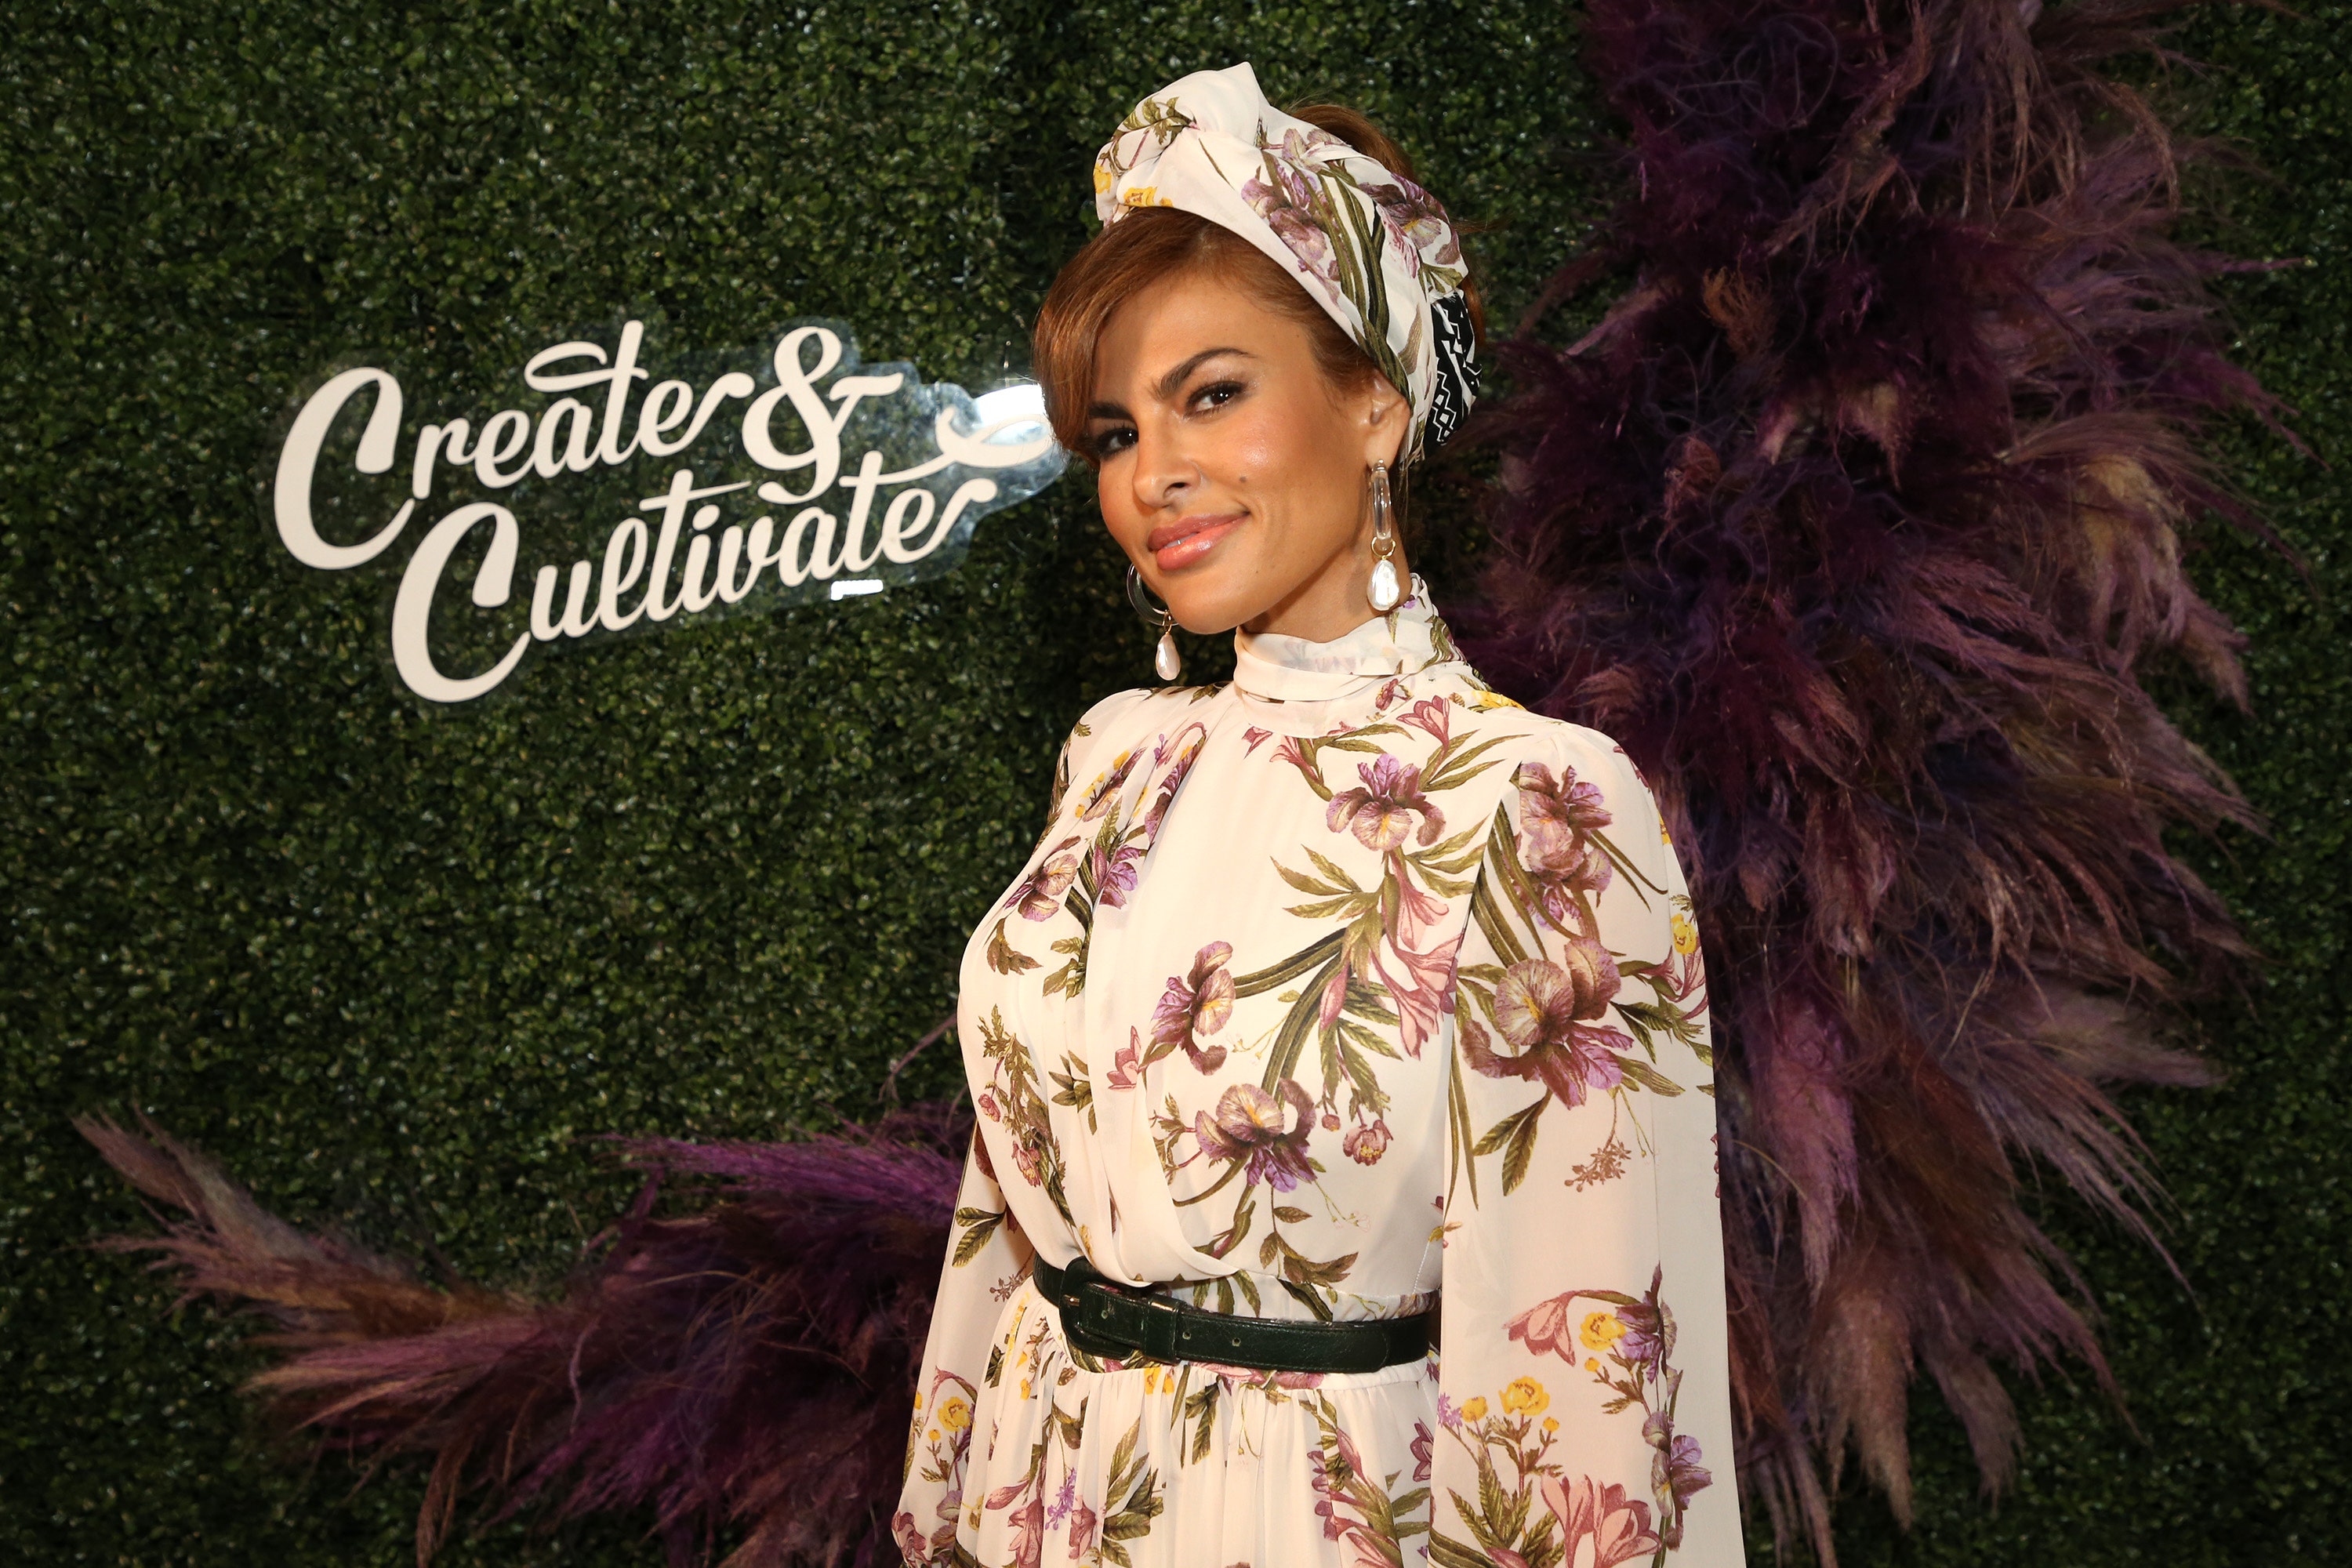 Though Eva Mendes has clarified that she has not quit acting, she is very selective about which roles she takes these days. “I had a career and then I changed my focus to my family,” she has said.